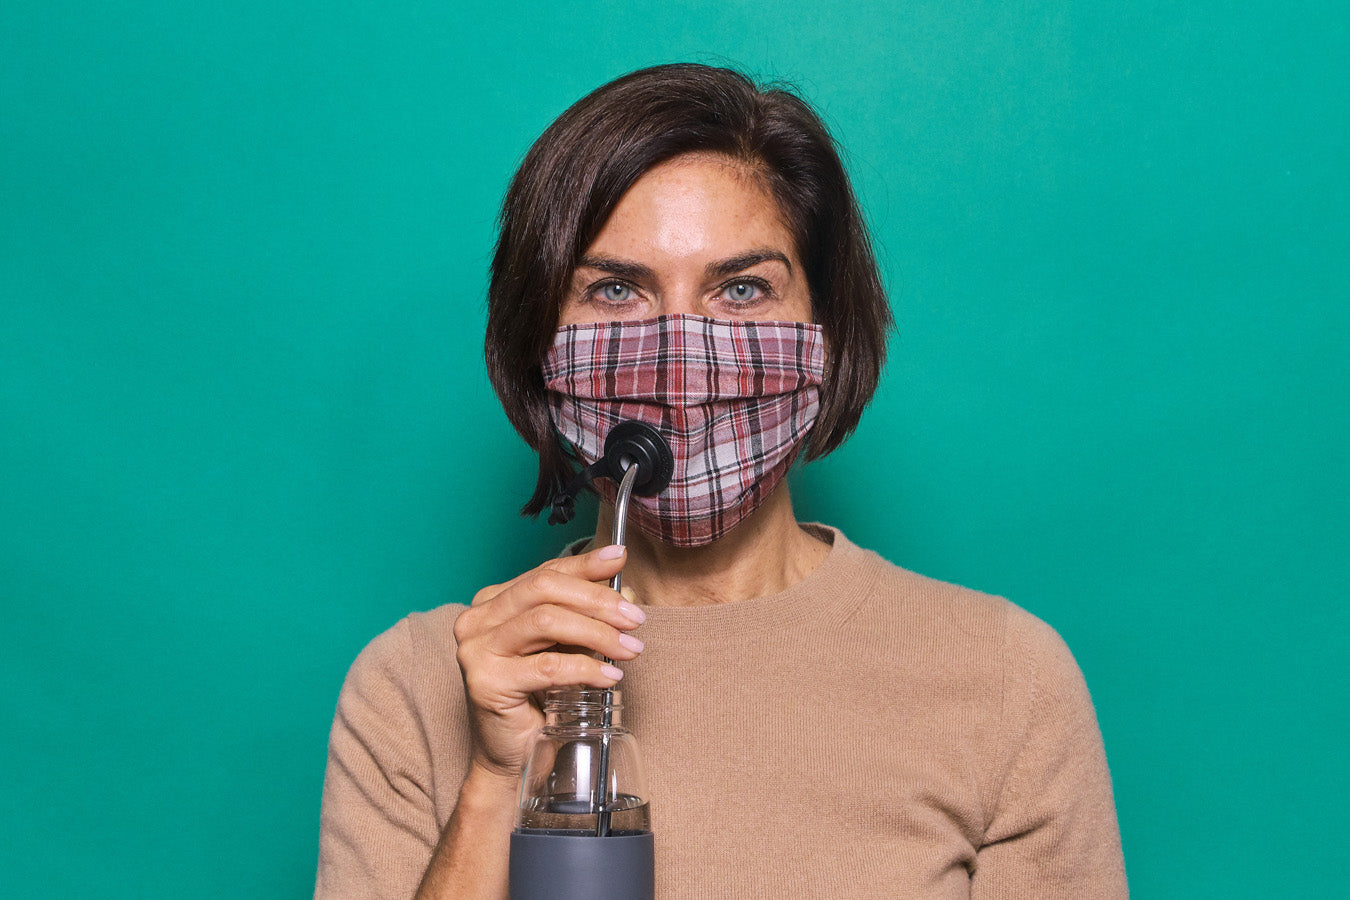 The Suck It Socket Adult mask in plaid with black socket